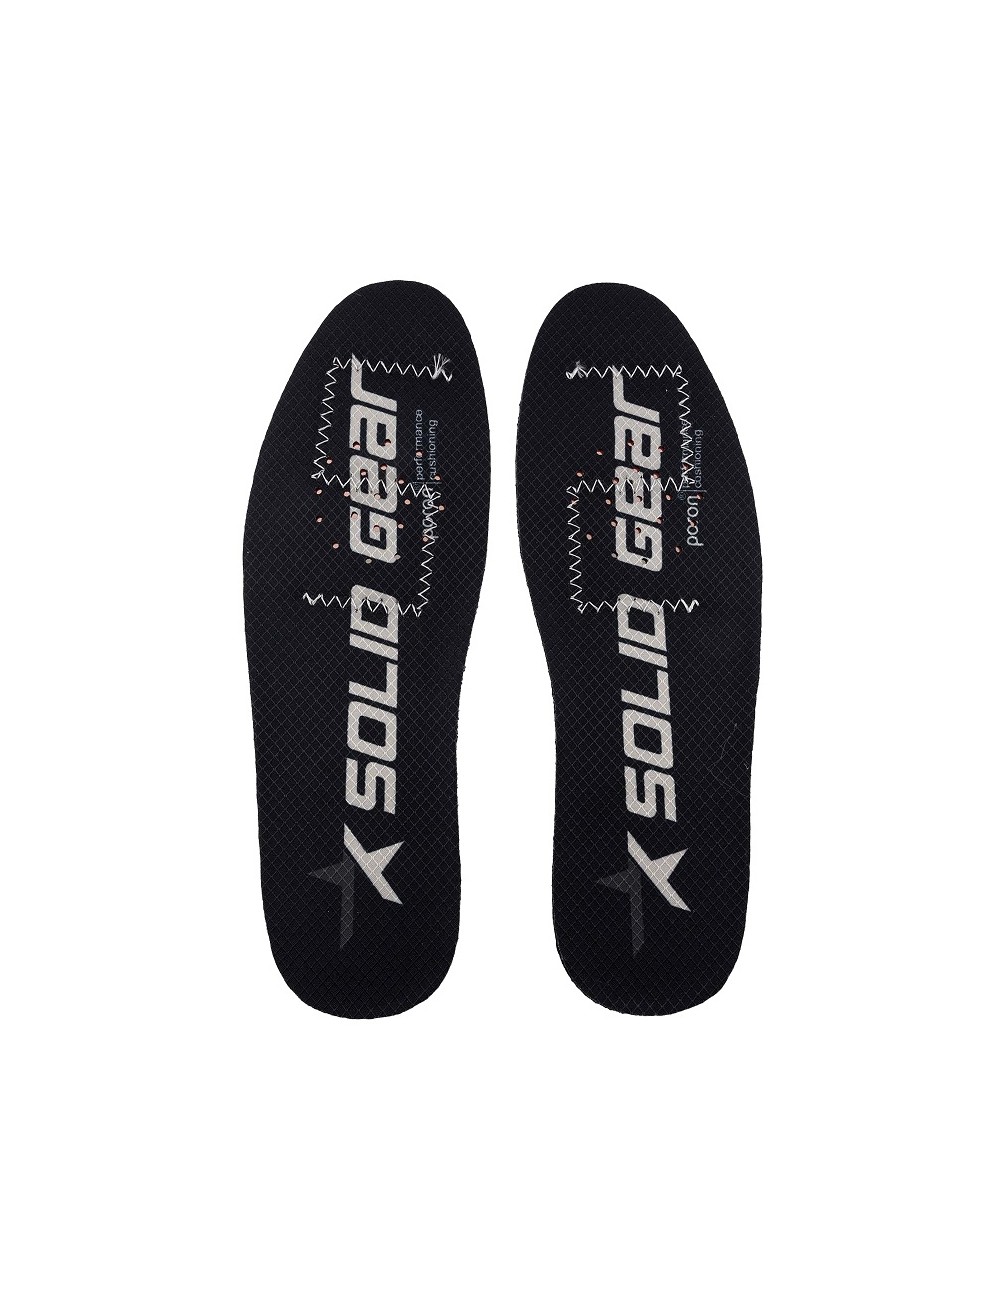 Solid Gear SG20002 shoe inserts